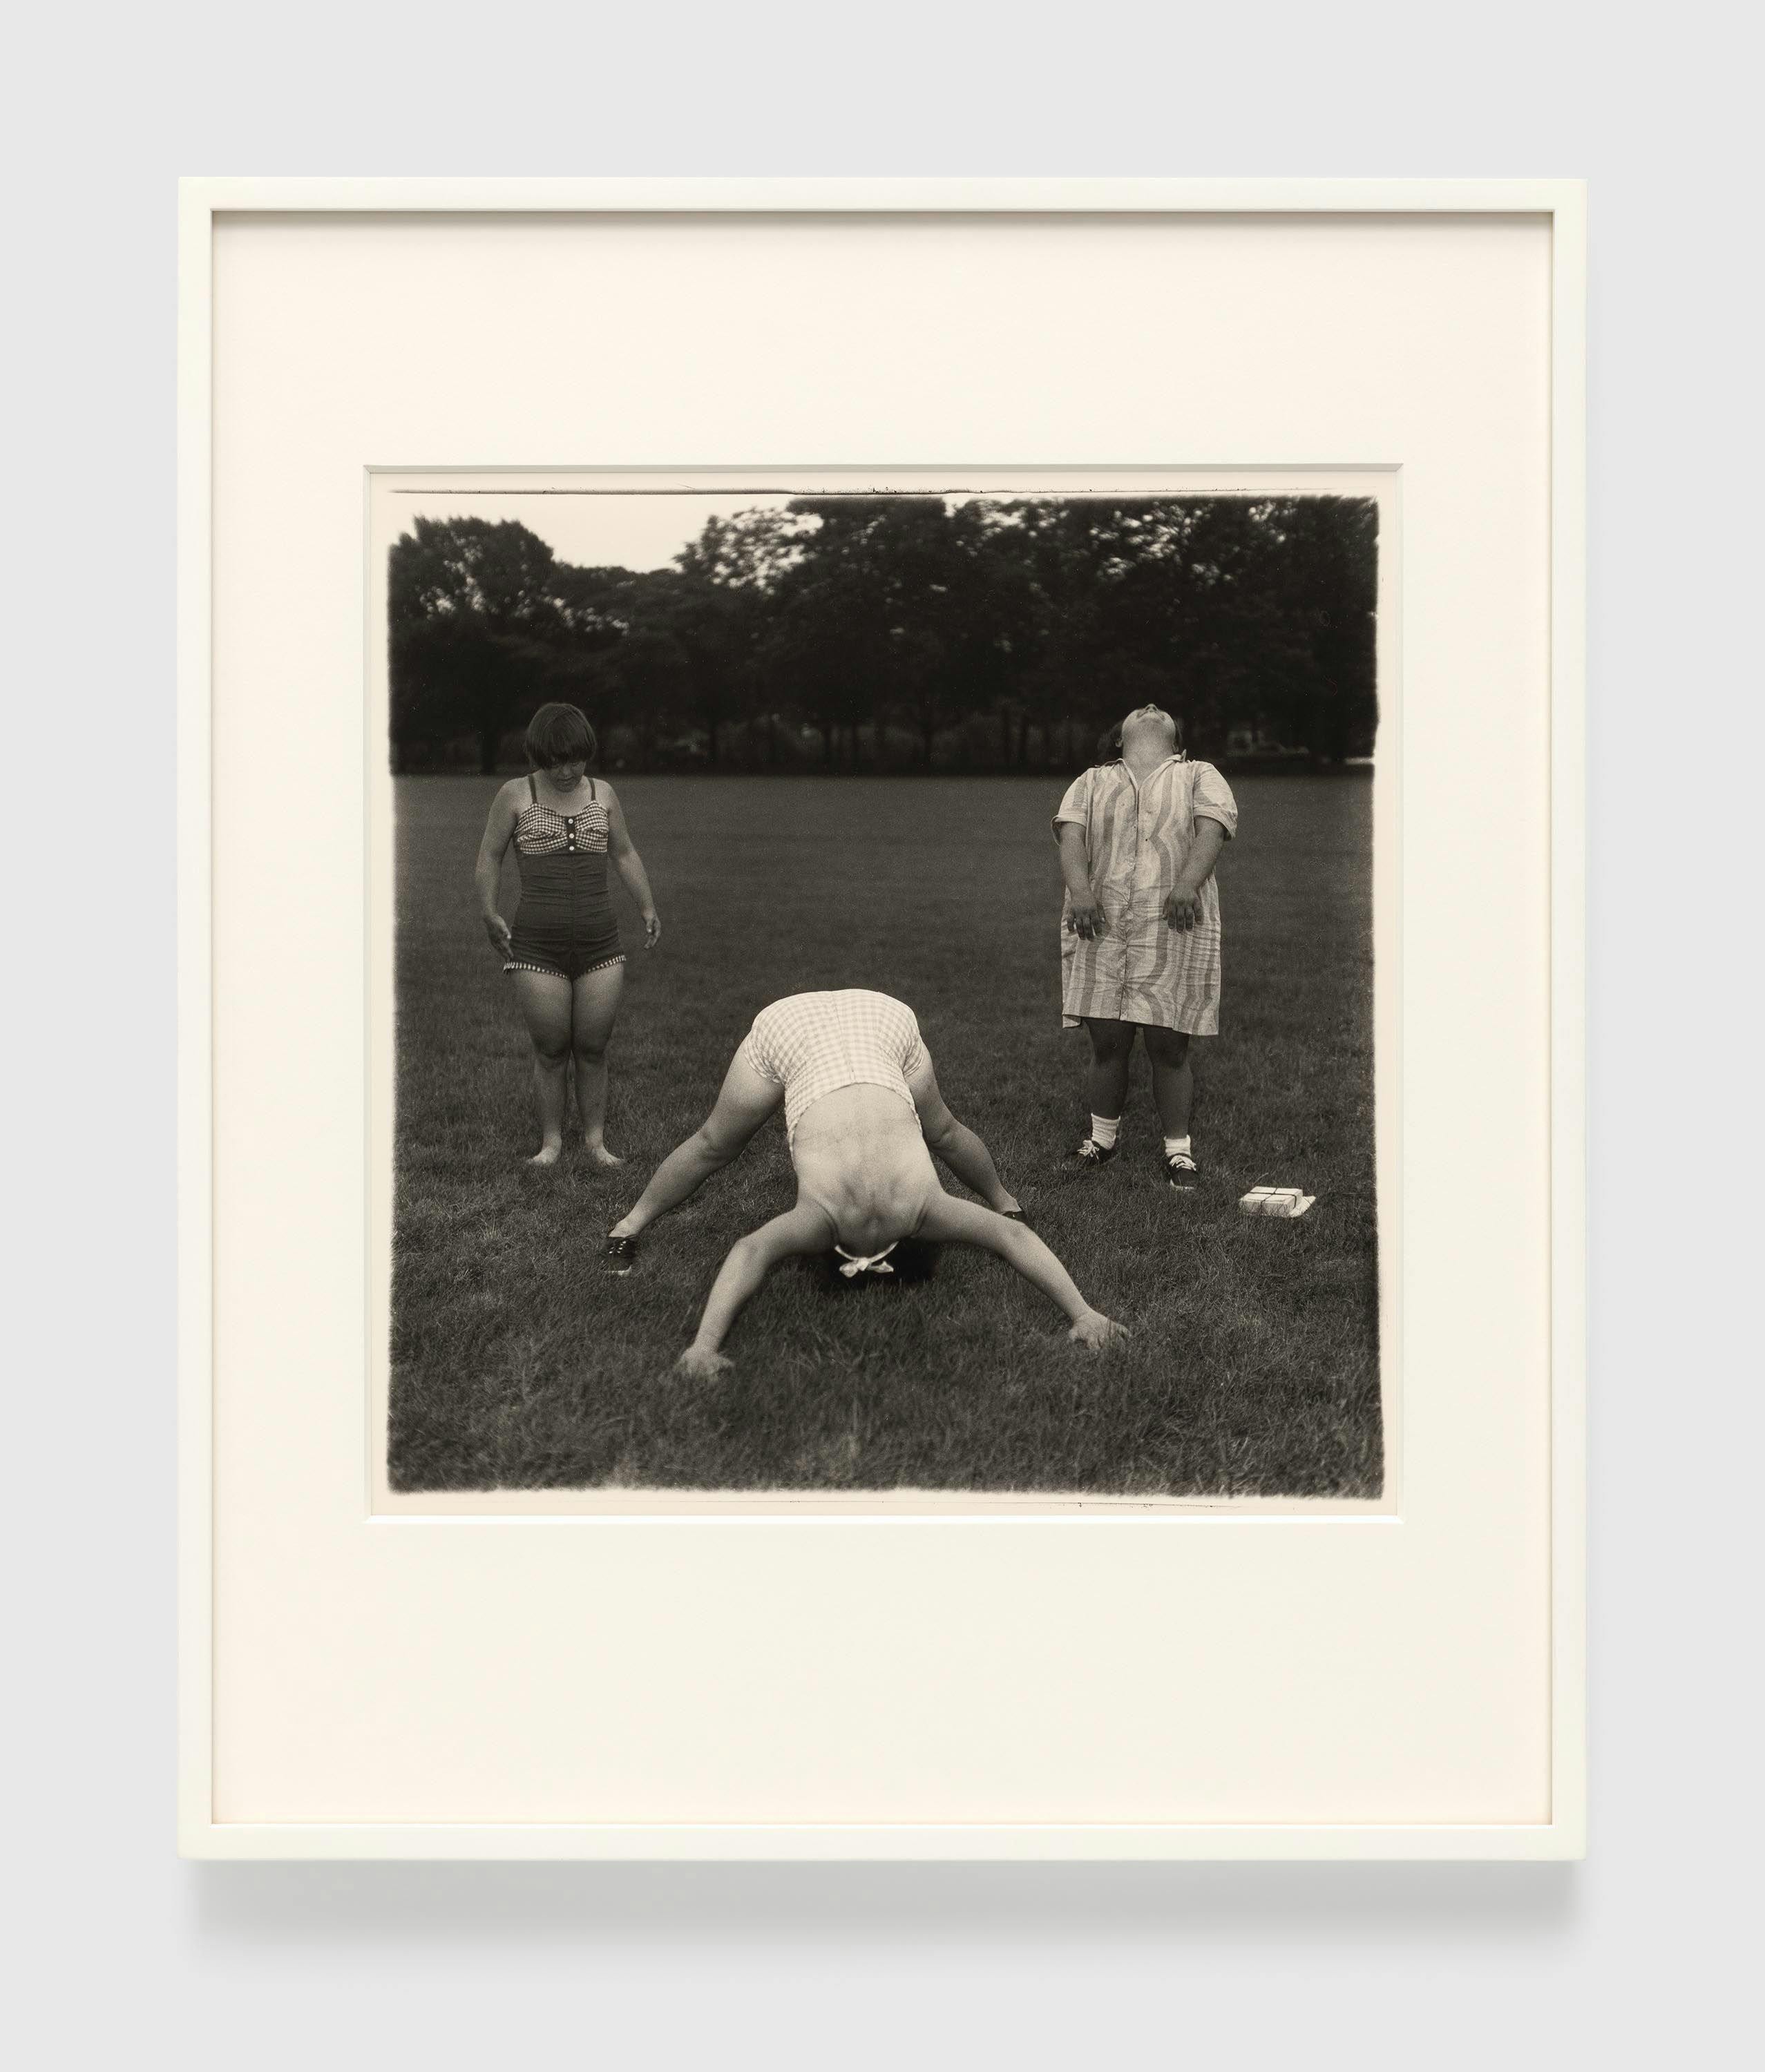 A gelatin silver print by Diane Arbus, titled Untitled (6) 1970-71, dated 1970-1971.